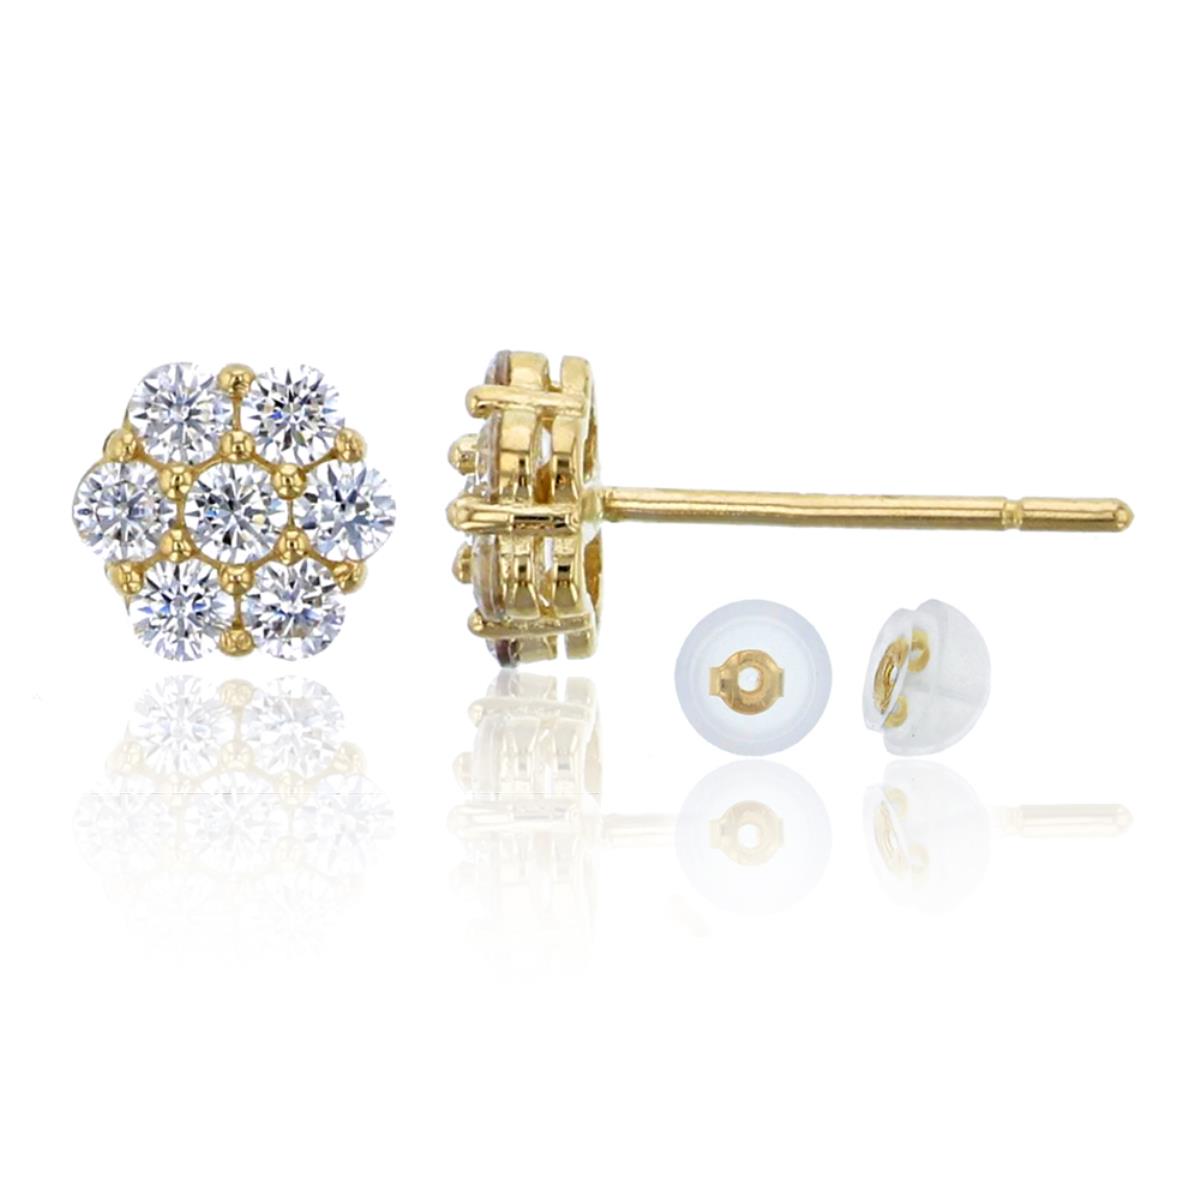 14K Yellow Gold Pave 1.75mm Rd White Swarovski Zirconia Cluster CZ Stud Earring & 14K Silicone Back